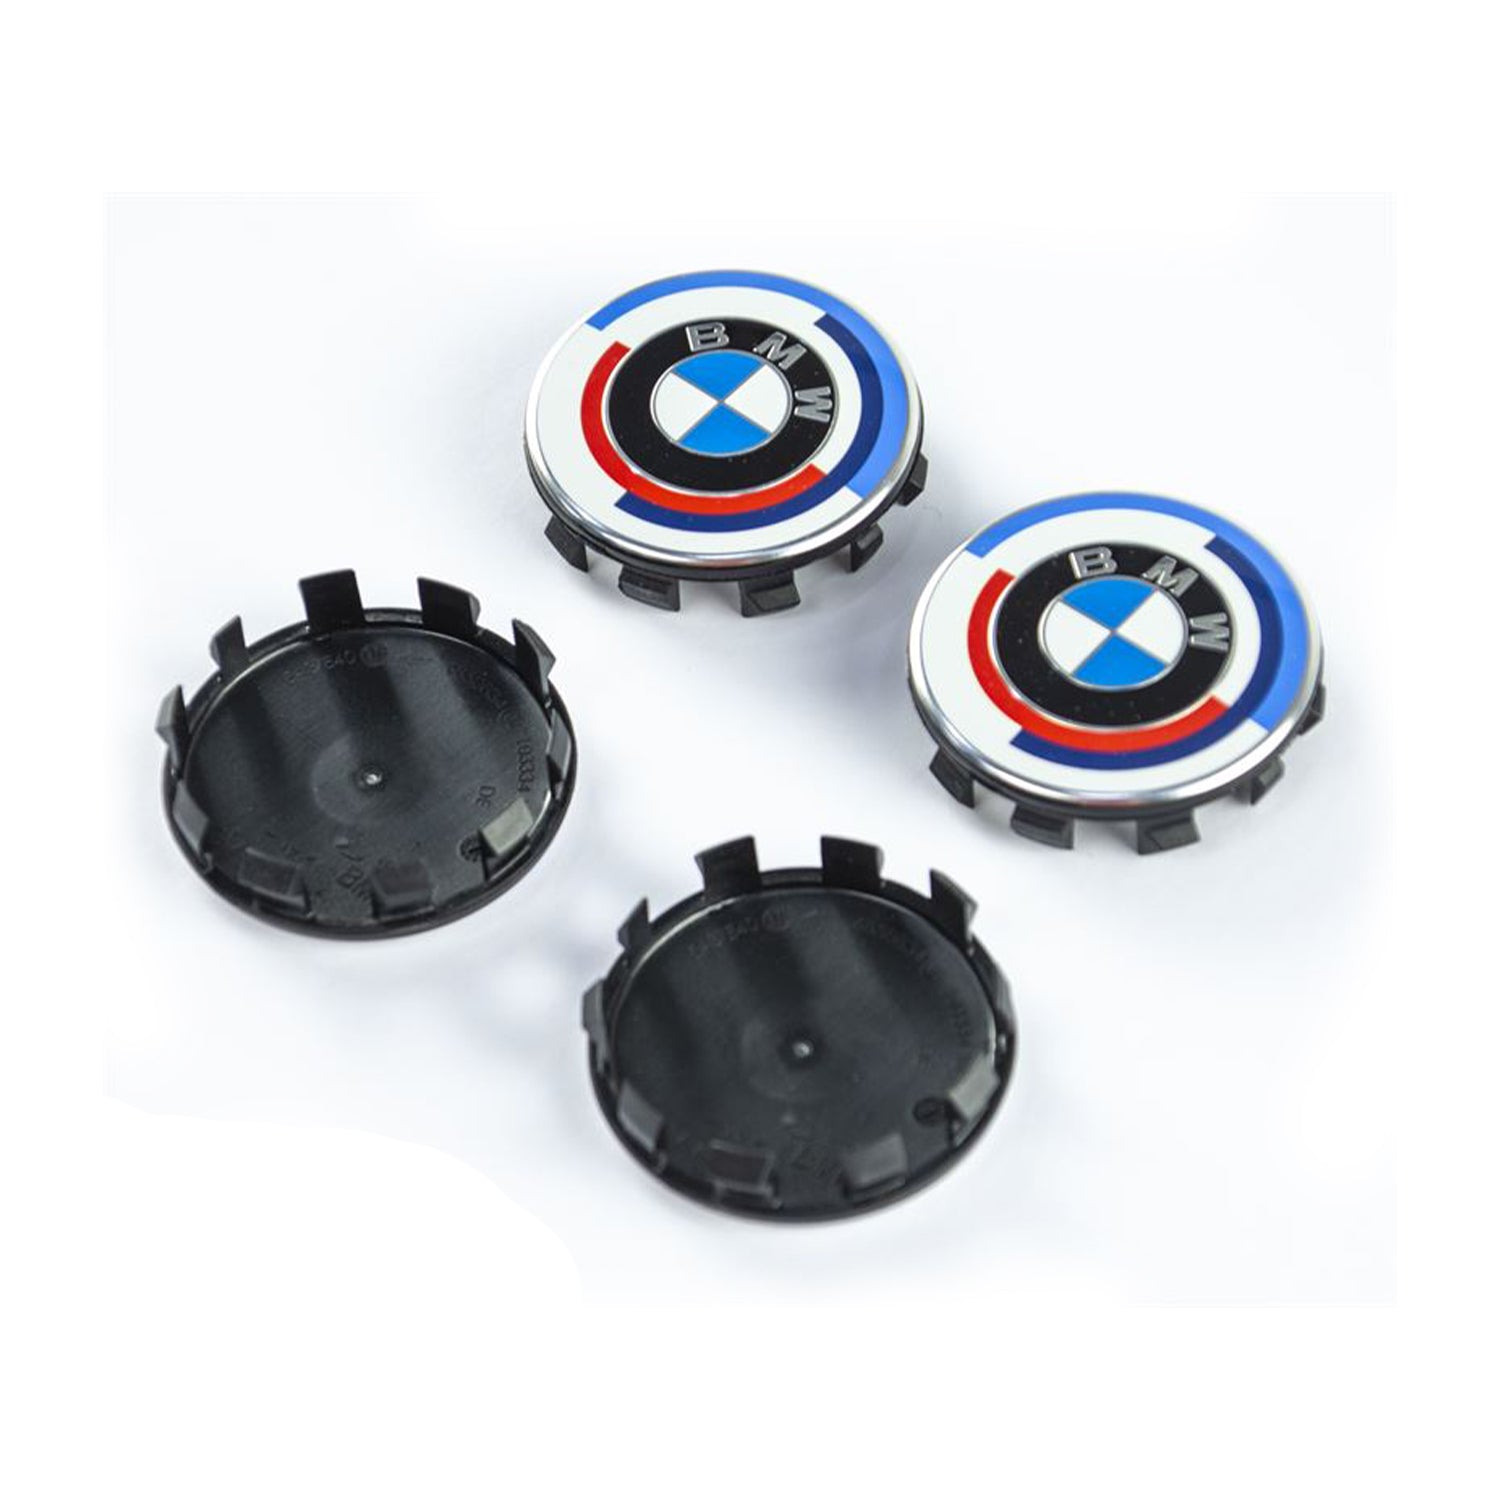 Genuine BMW 36125A57484 M 50th Anniversary Centre Caps 50mm Available at R44 Performance